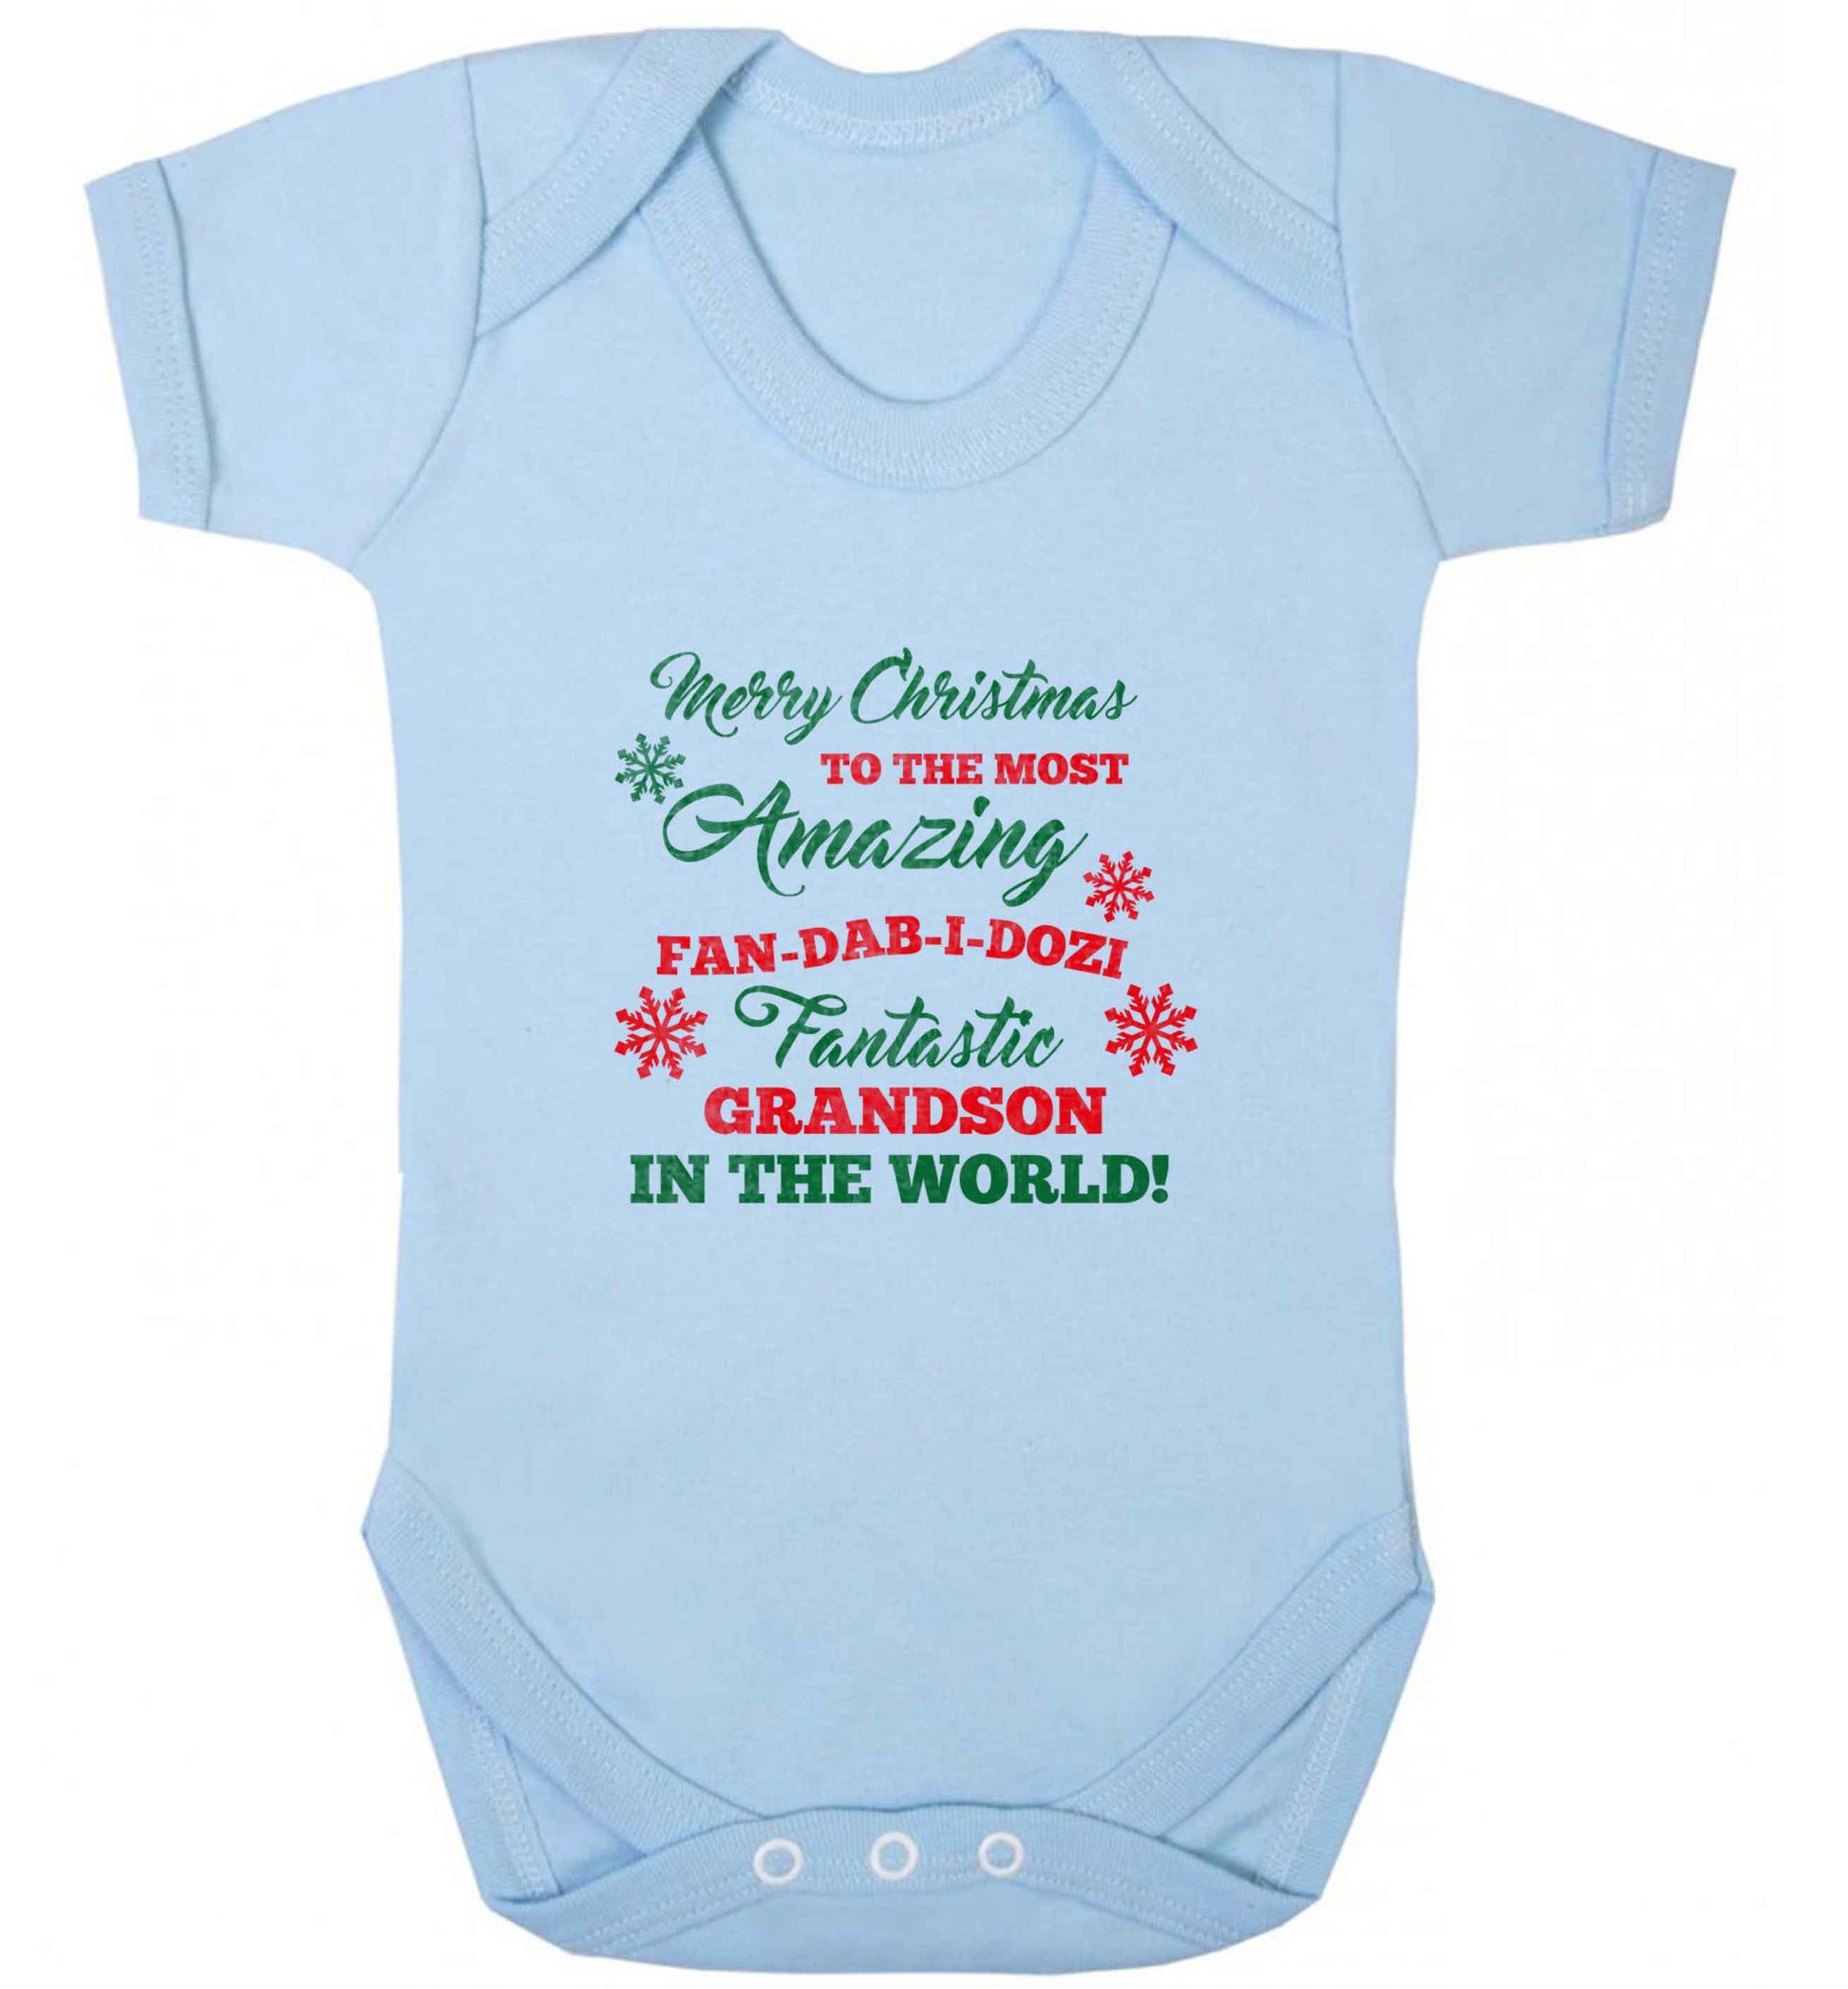 Merry Christmas to the most amazing fan-dab-i-dozi fantasic Grandson in the world baby vest pale blue 18-24 months